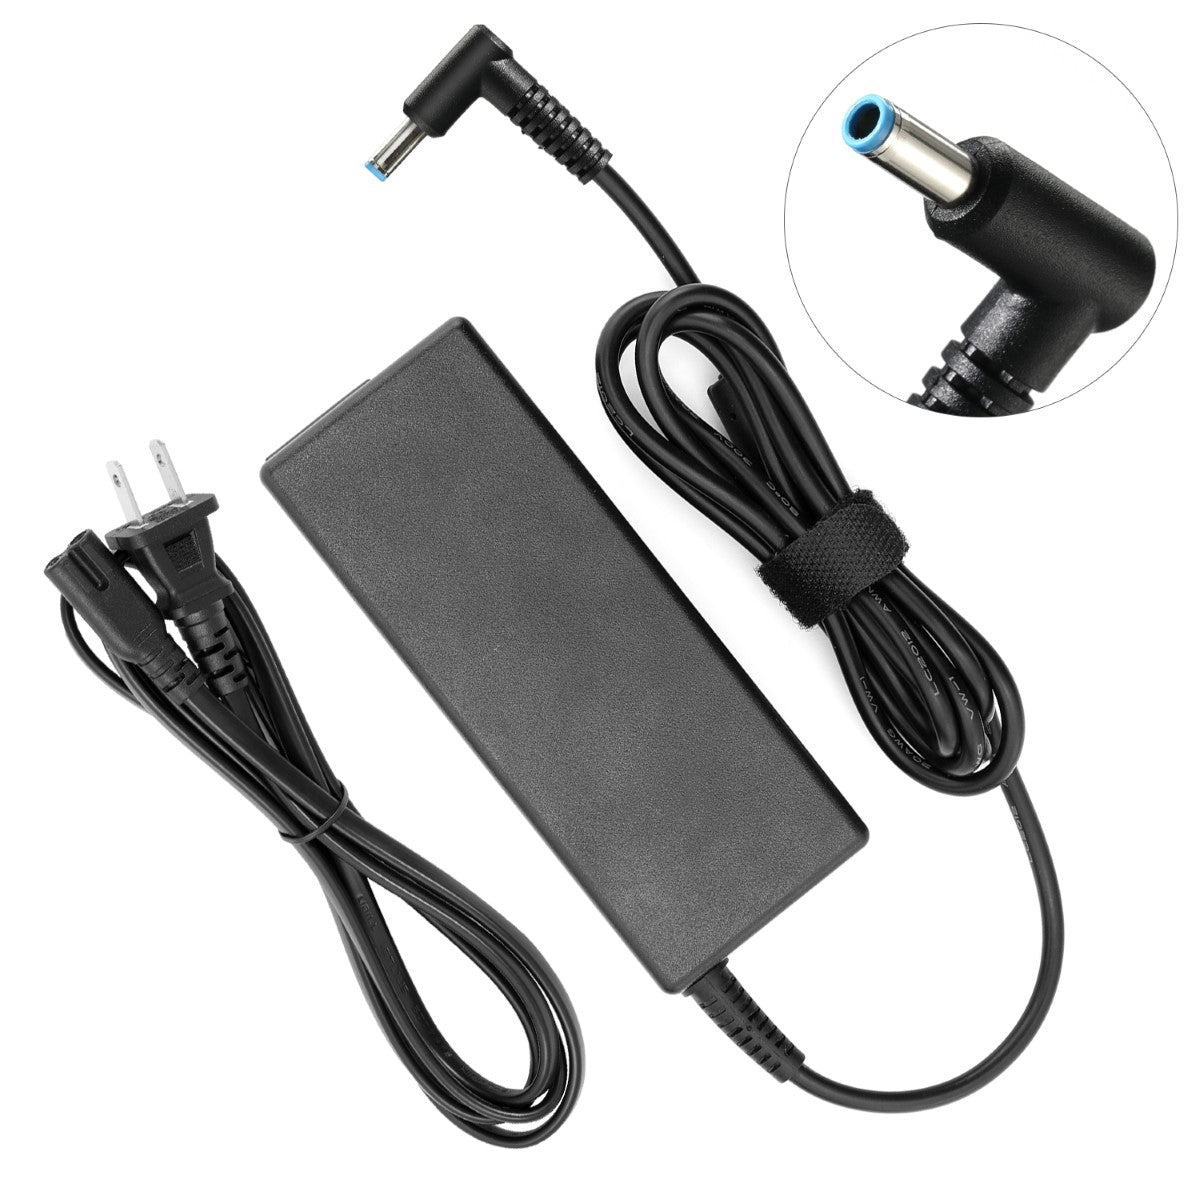 Charger for HP x360 11-p110nr Convertible Laptop